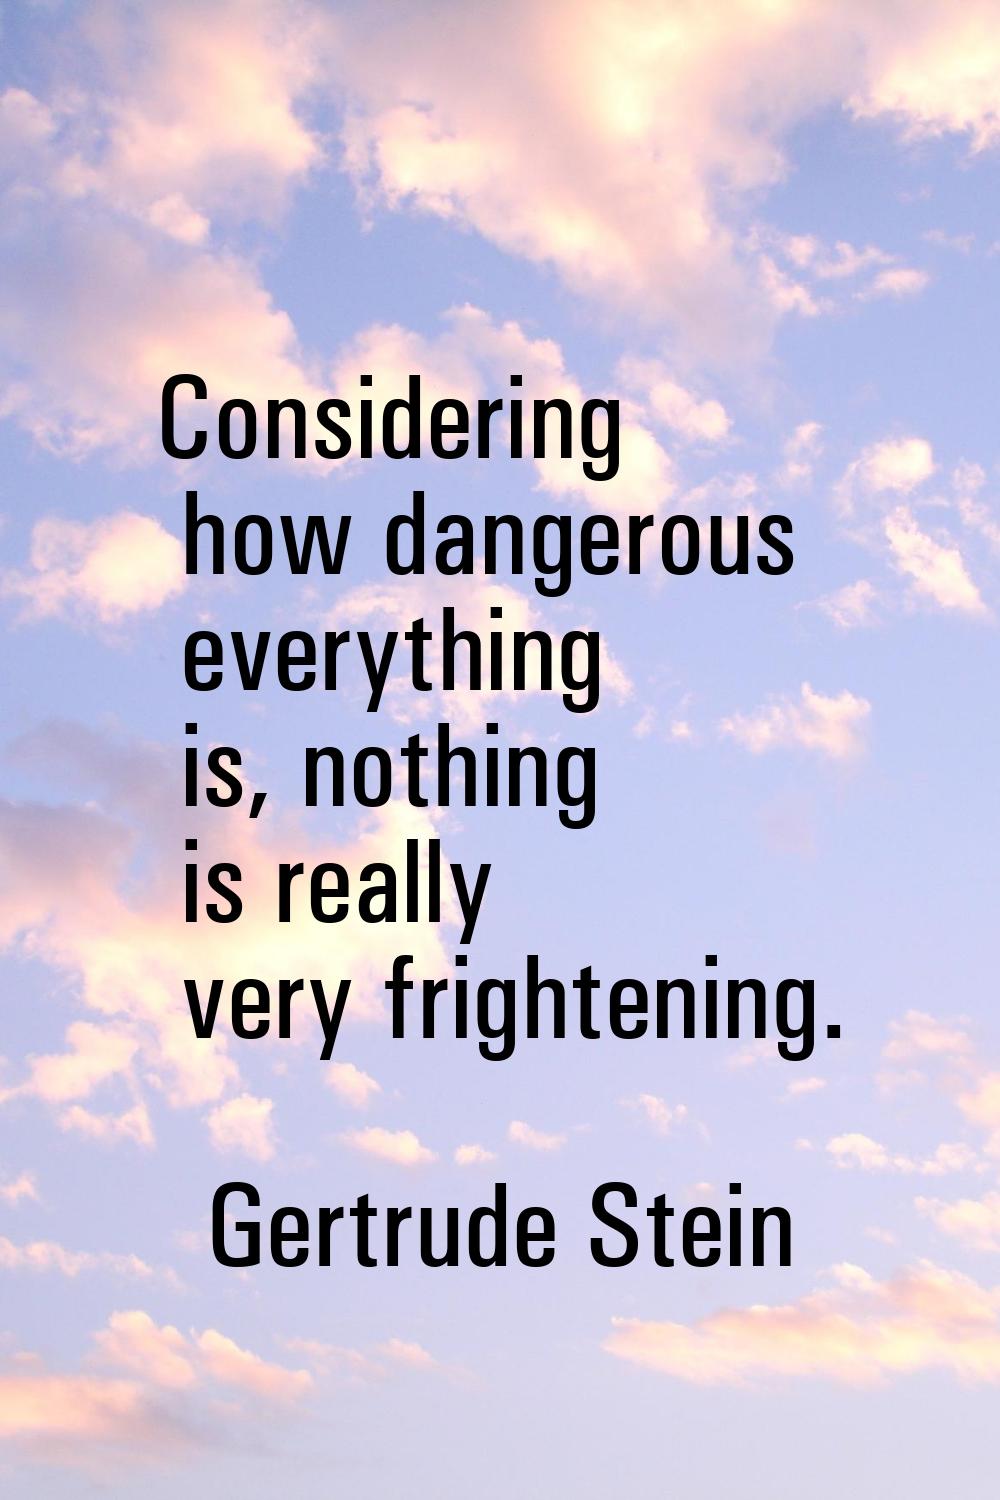 Considering how dangerous everything is, nothing is really very frightening.